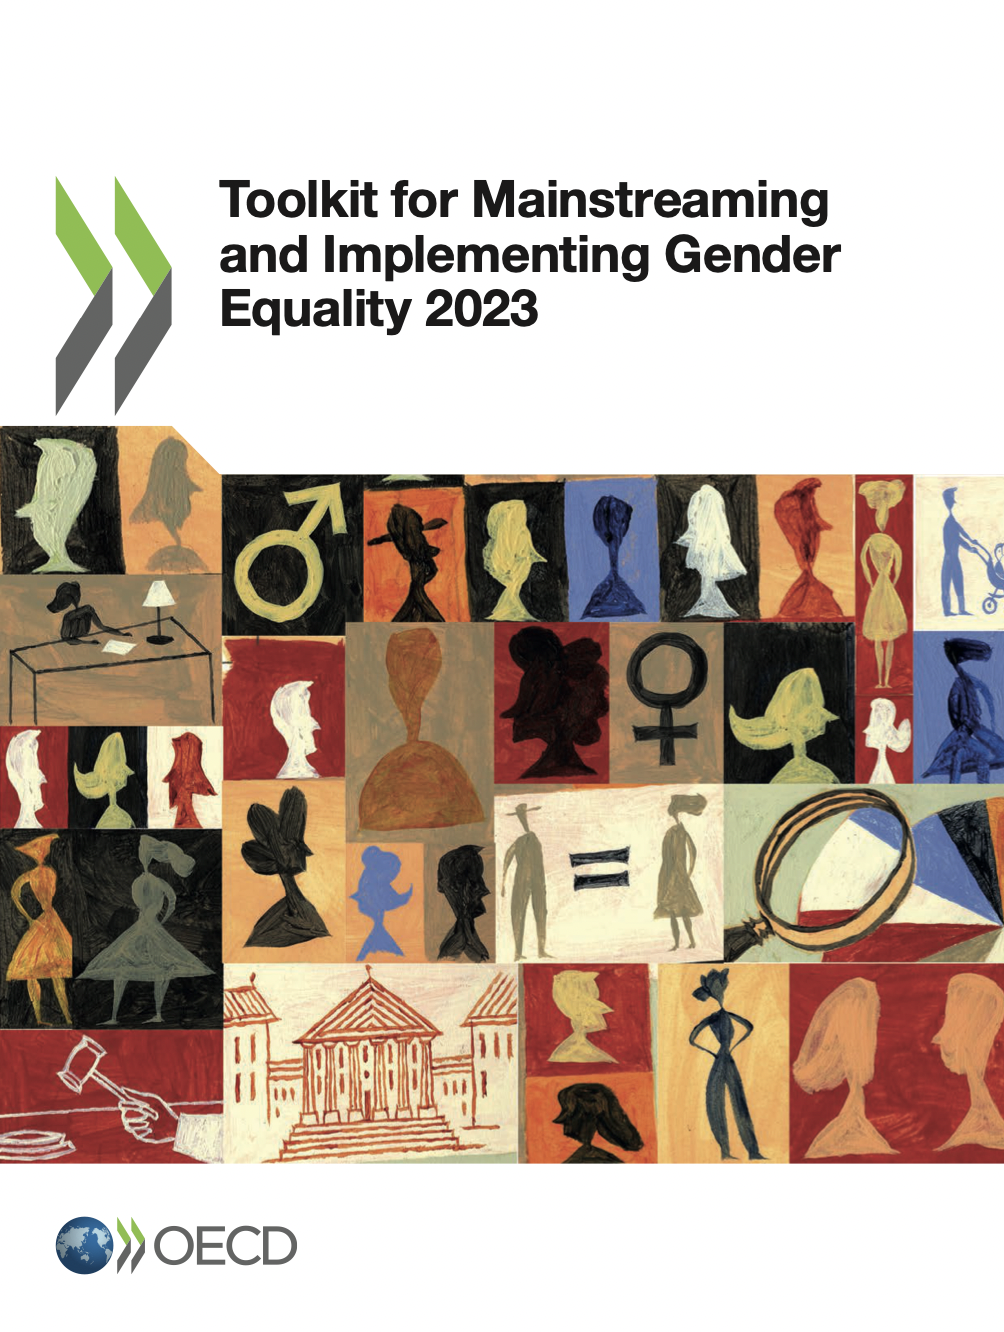 Toolkit for Mainstreaming and Implementing Gender Equality 2023